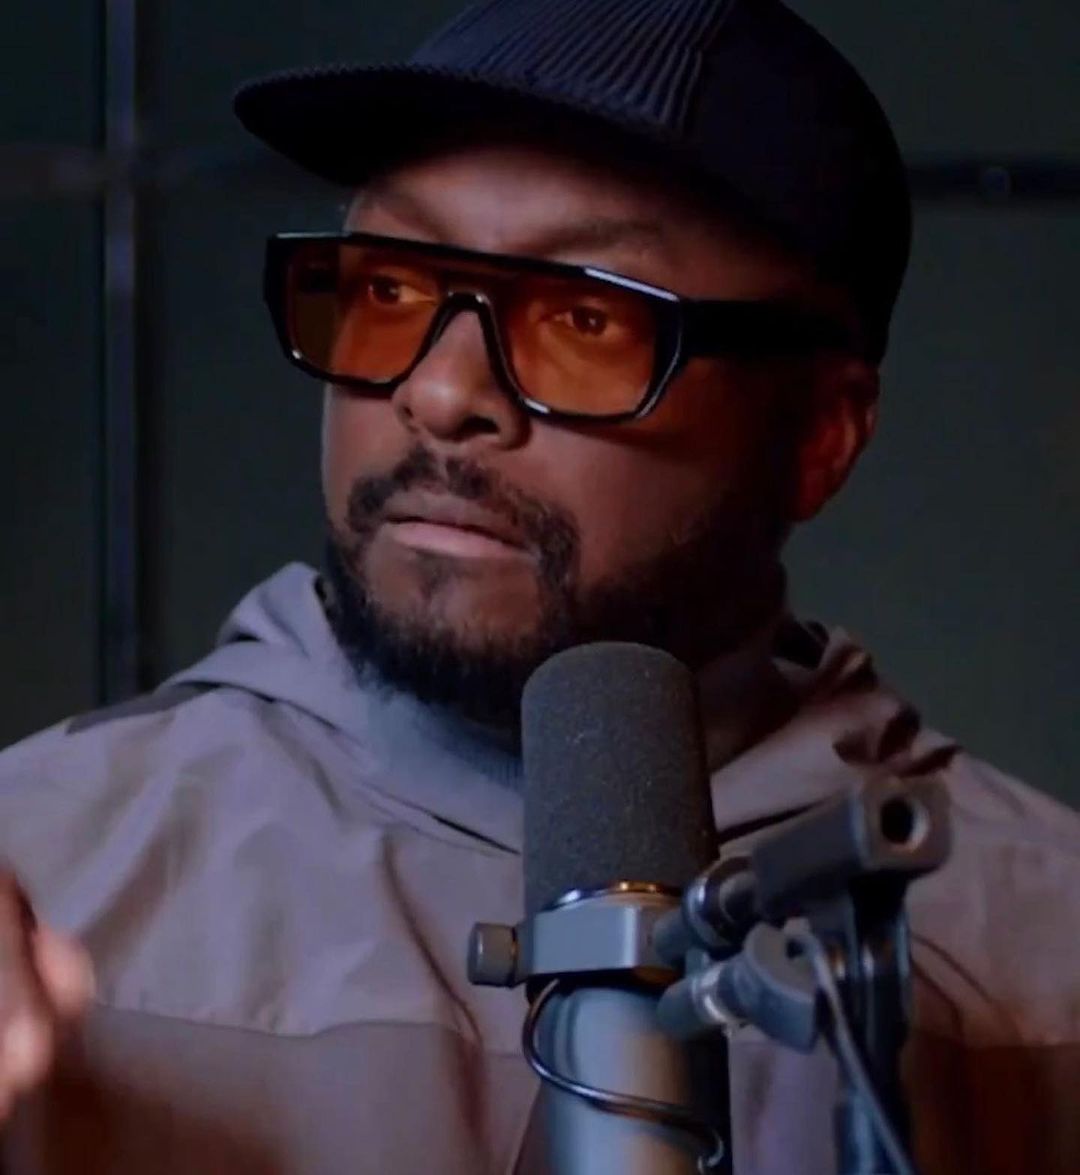 WILL.I.AM wearing the THIERRY LASRY “KLASSY” sunglasses